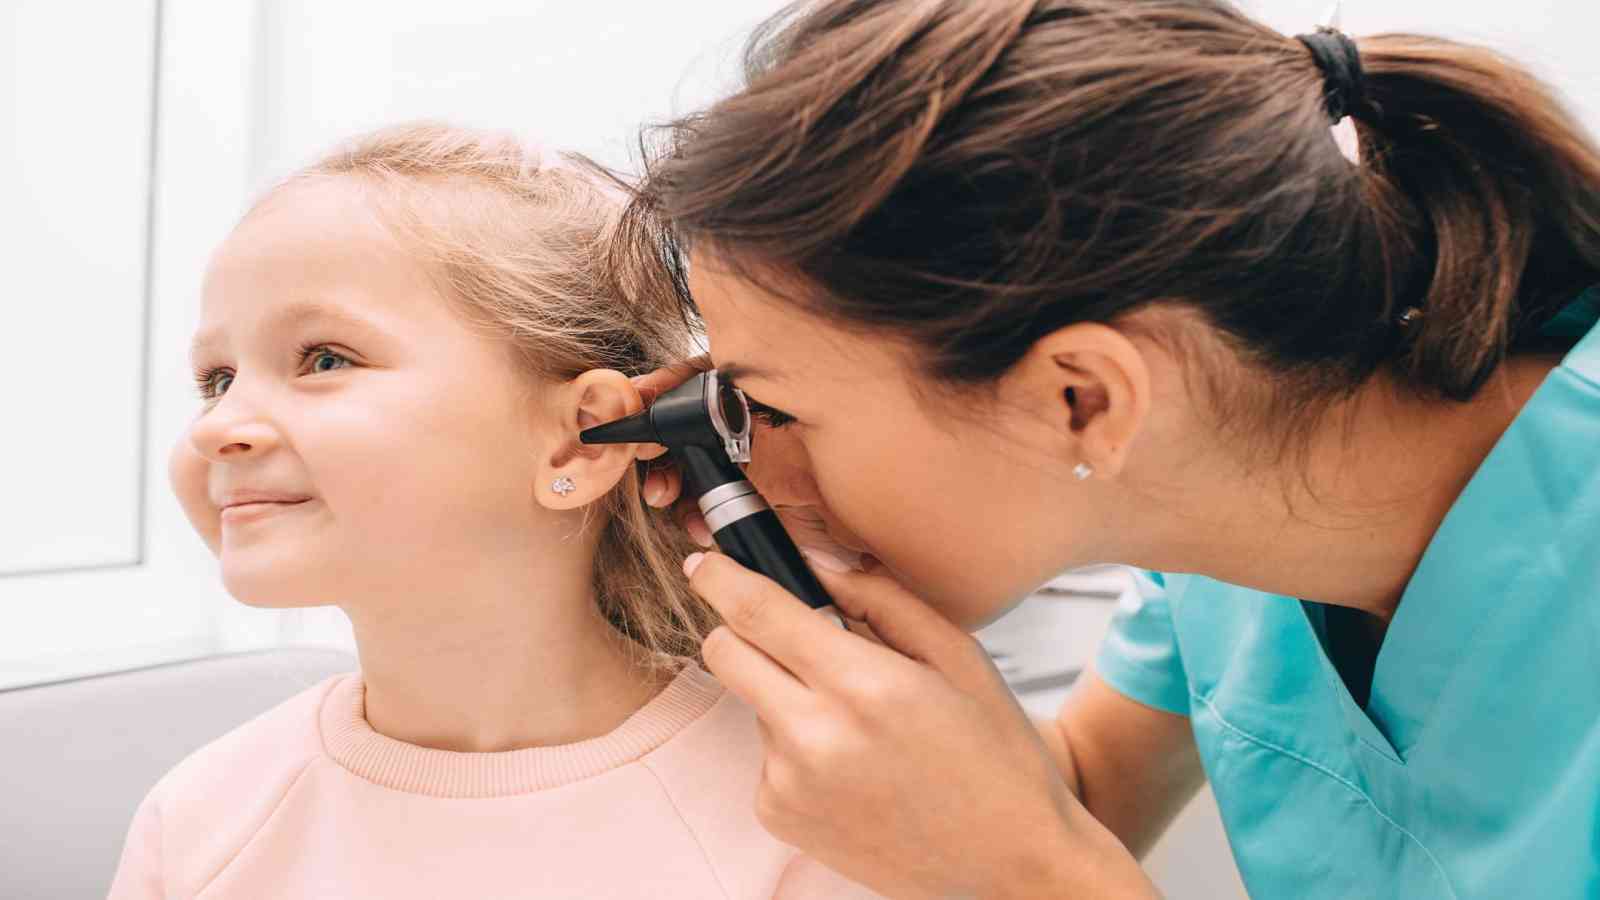 International Ear Care Day 2023: Date, History, Facts